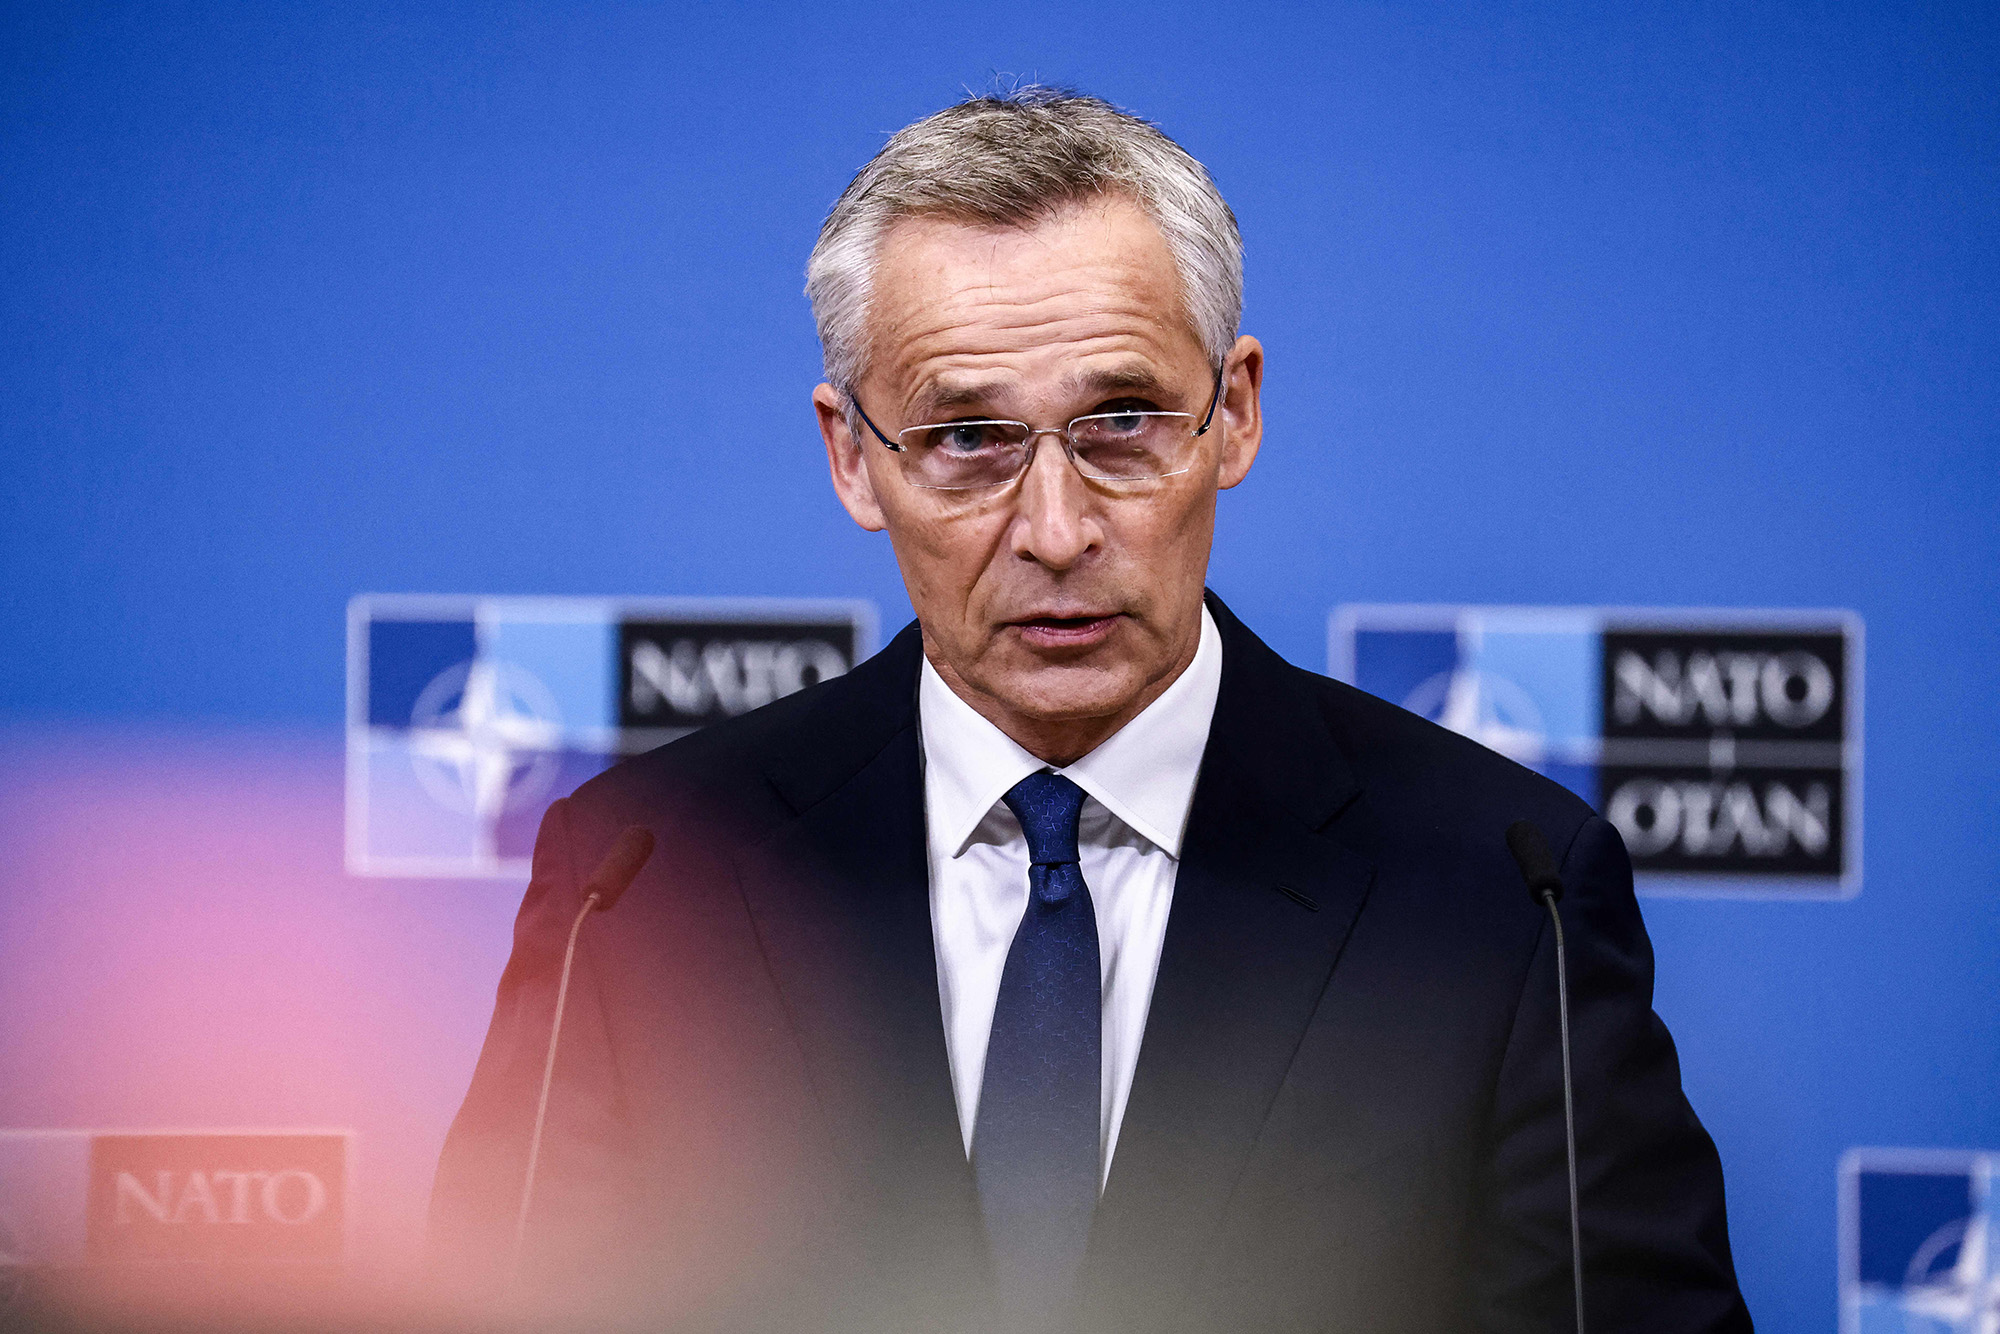 NATO Secretary General Jens Stoltenberg speaks during a press conference ahead of a two-day meeting of the alliance's Defence Ministers at the NATO headquarters in Brussels, Belgium, on October 11.